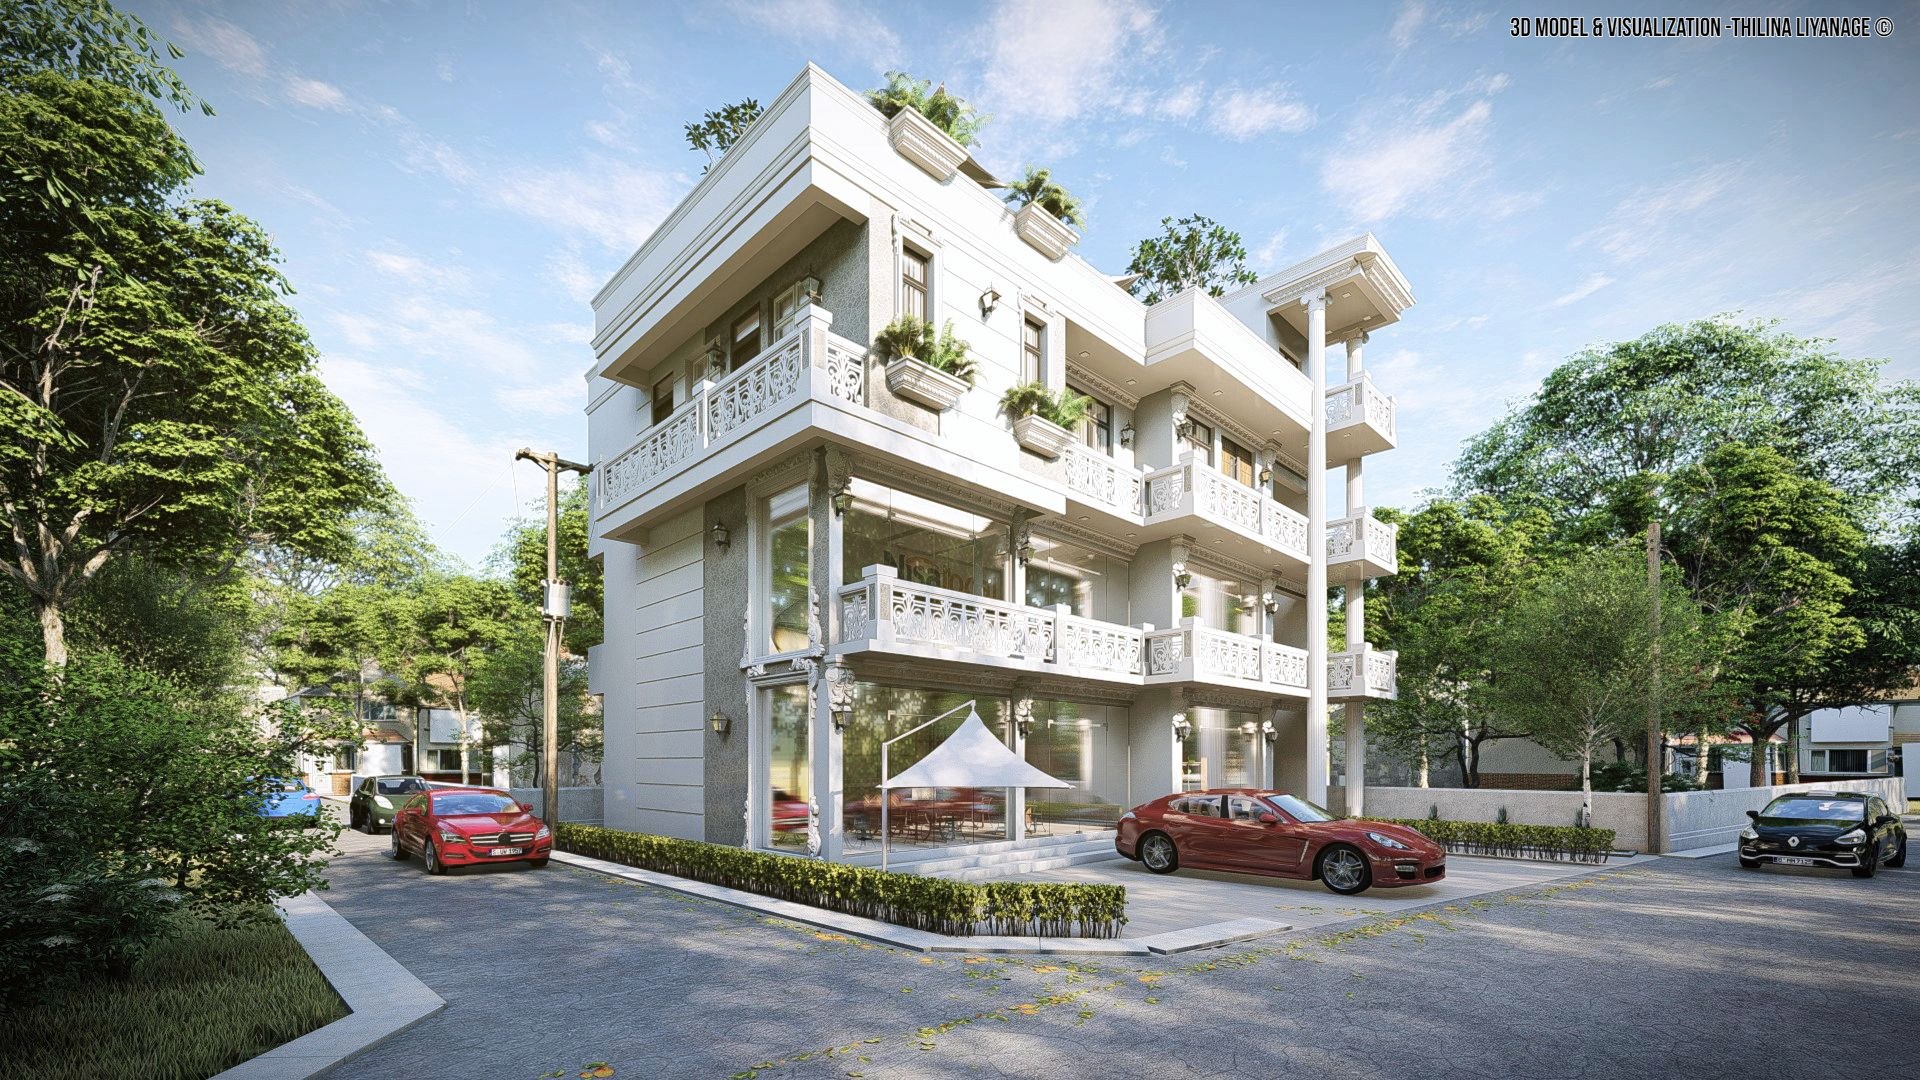 Commercial Residential Building By Thilina Liyanage 1161